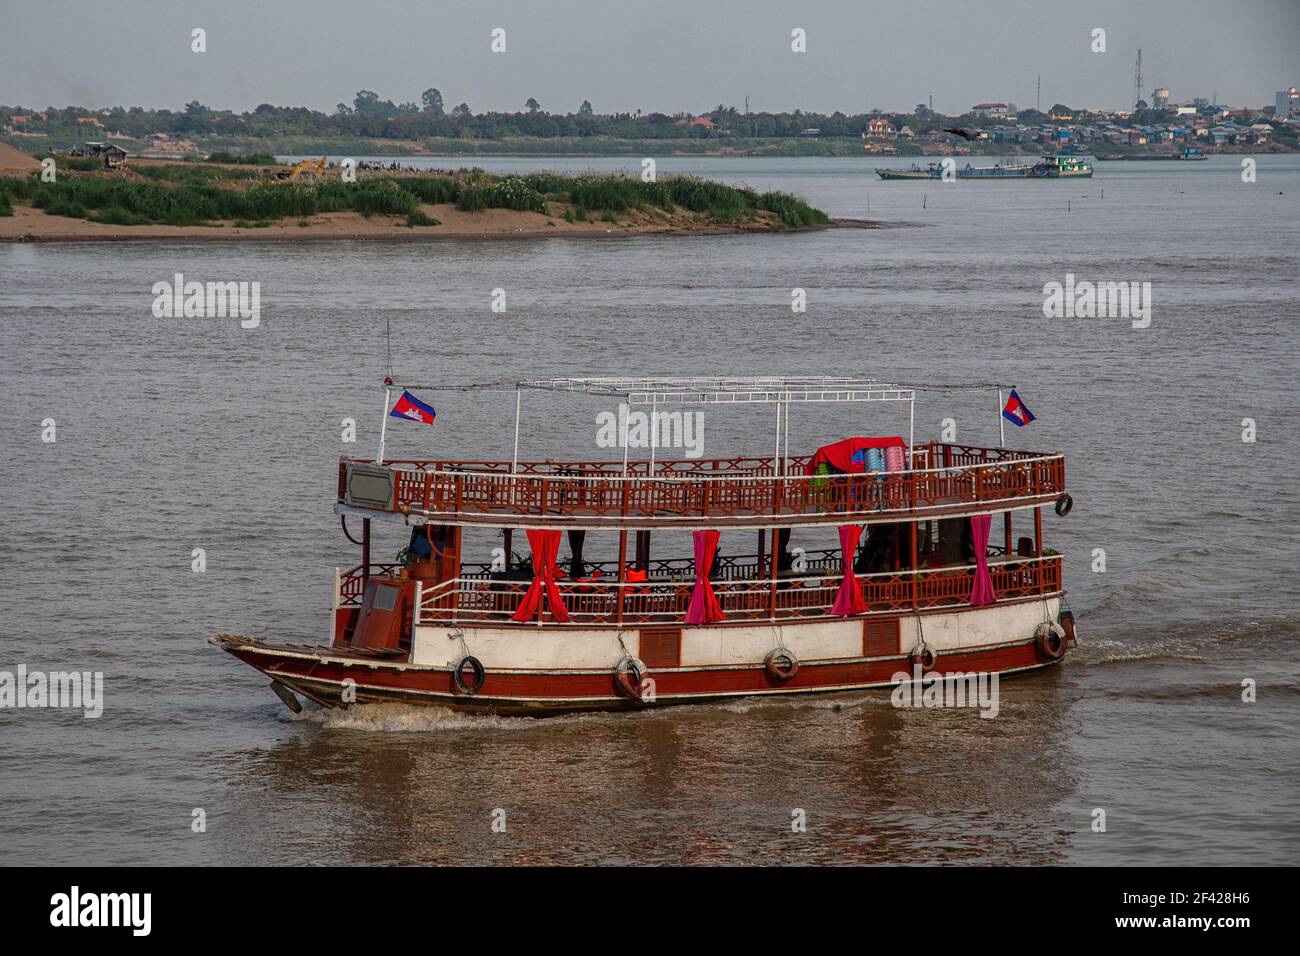 Traditional ship on the Tonle Sap River in Phnom Penh Stock Photo